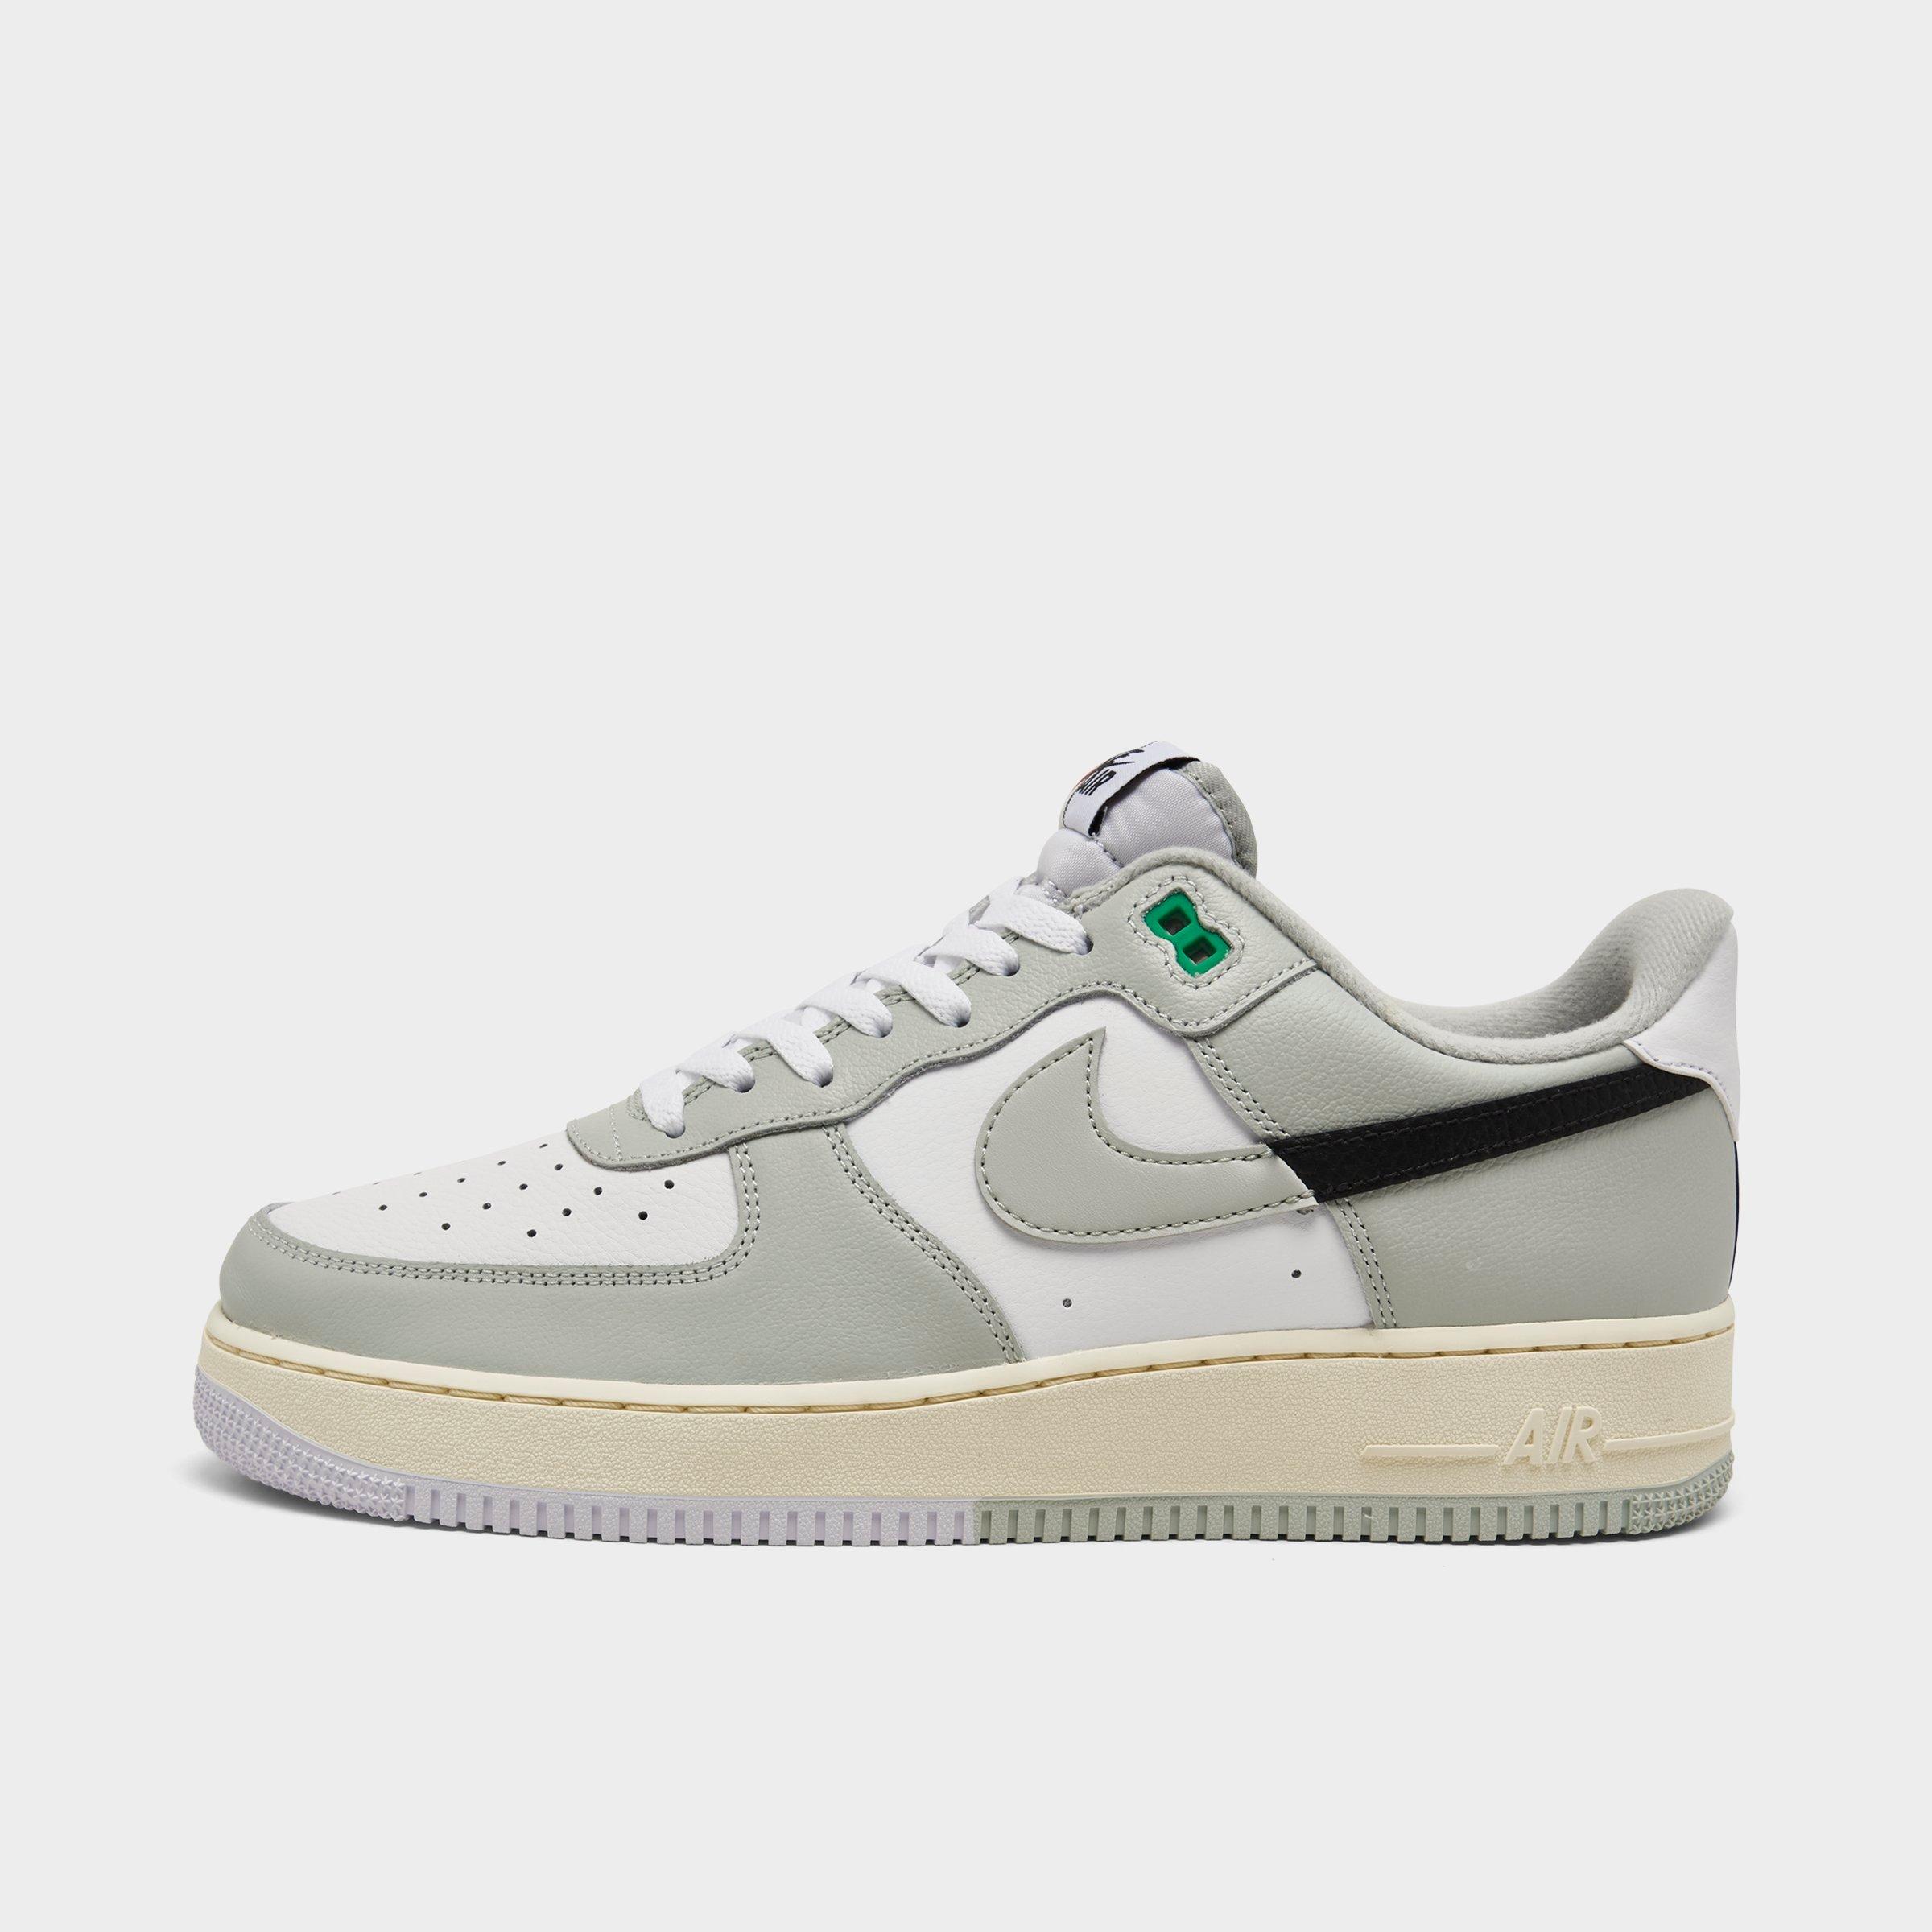 Nike Men's Air Force 1 Low '07 LV8 Casual Shoes